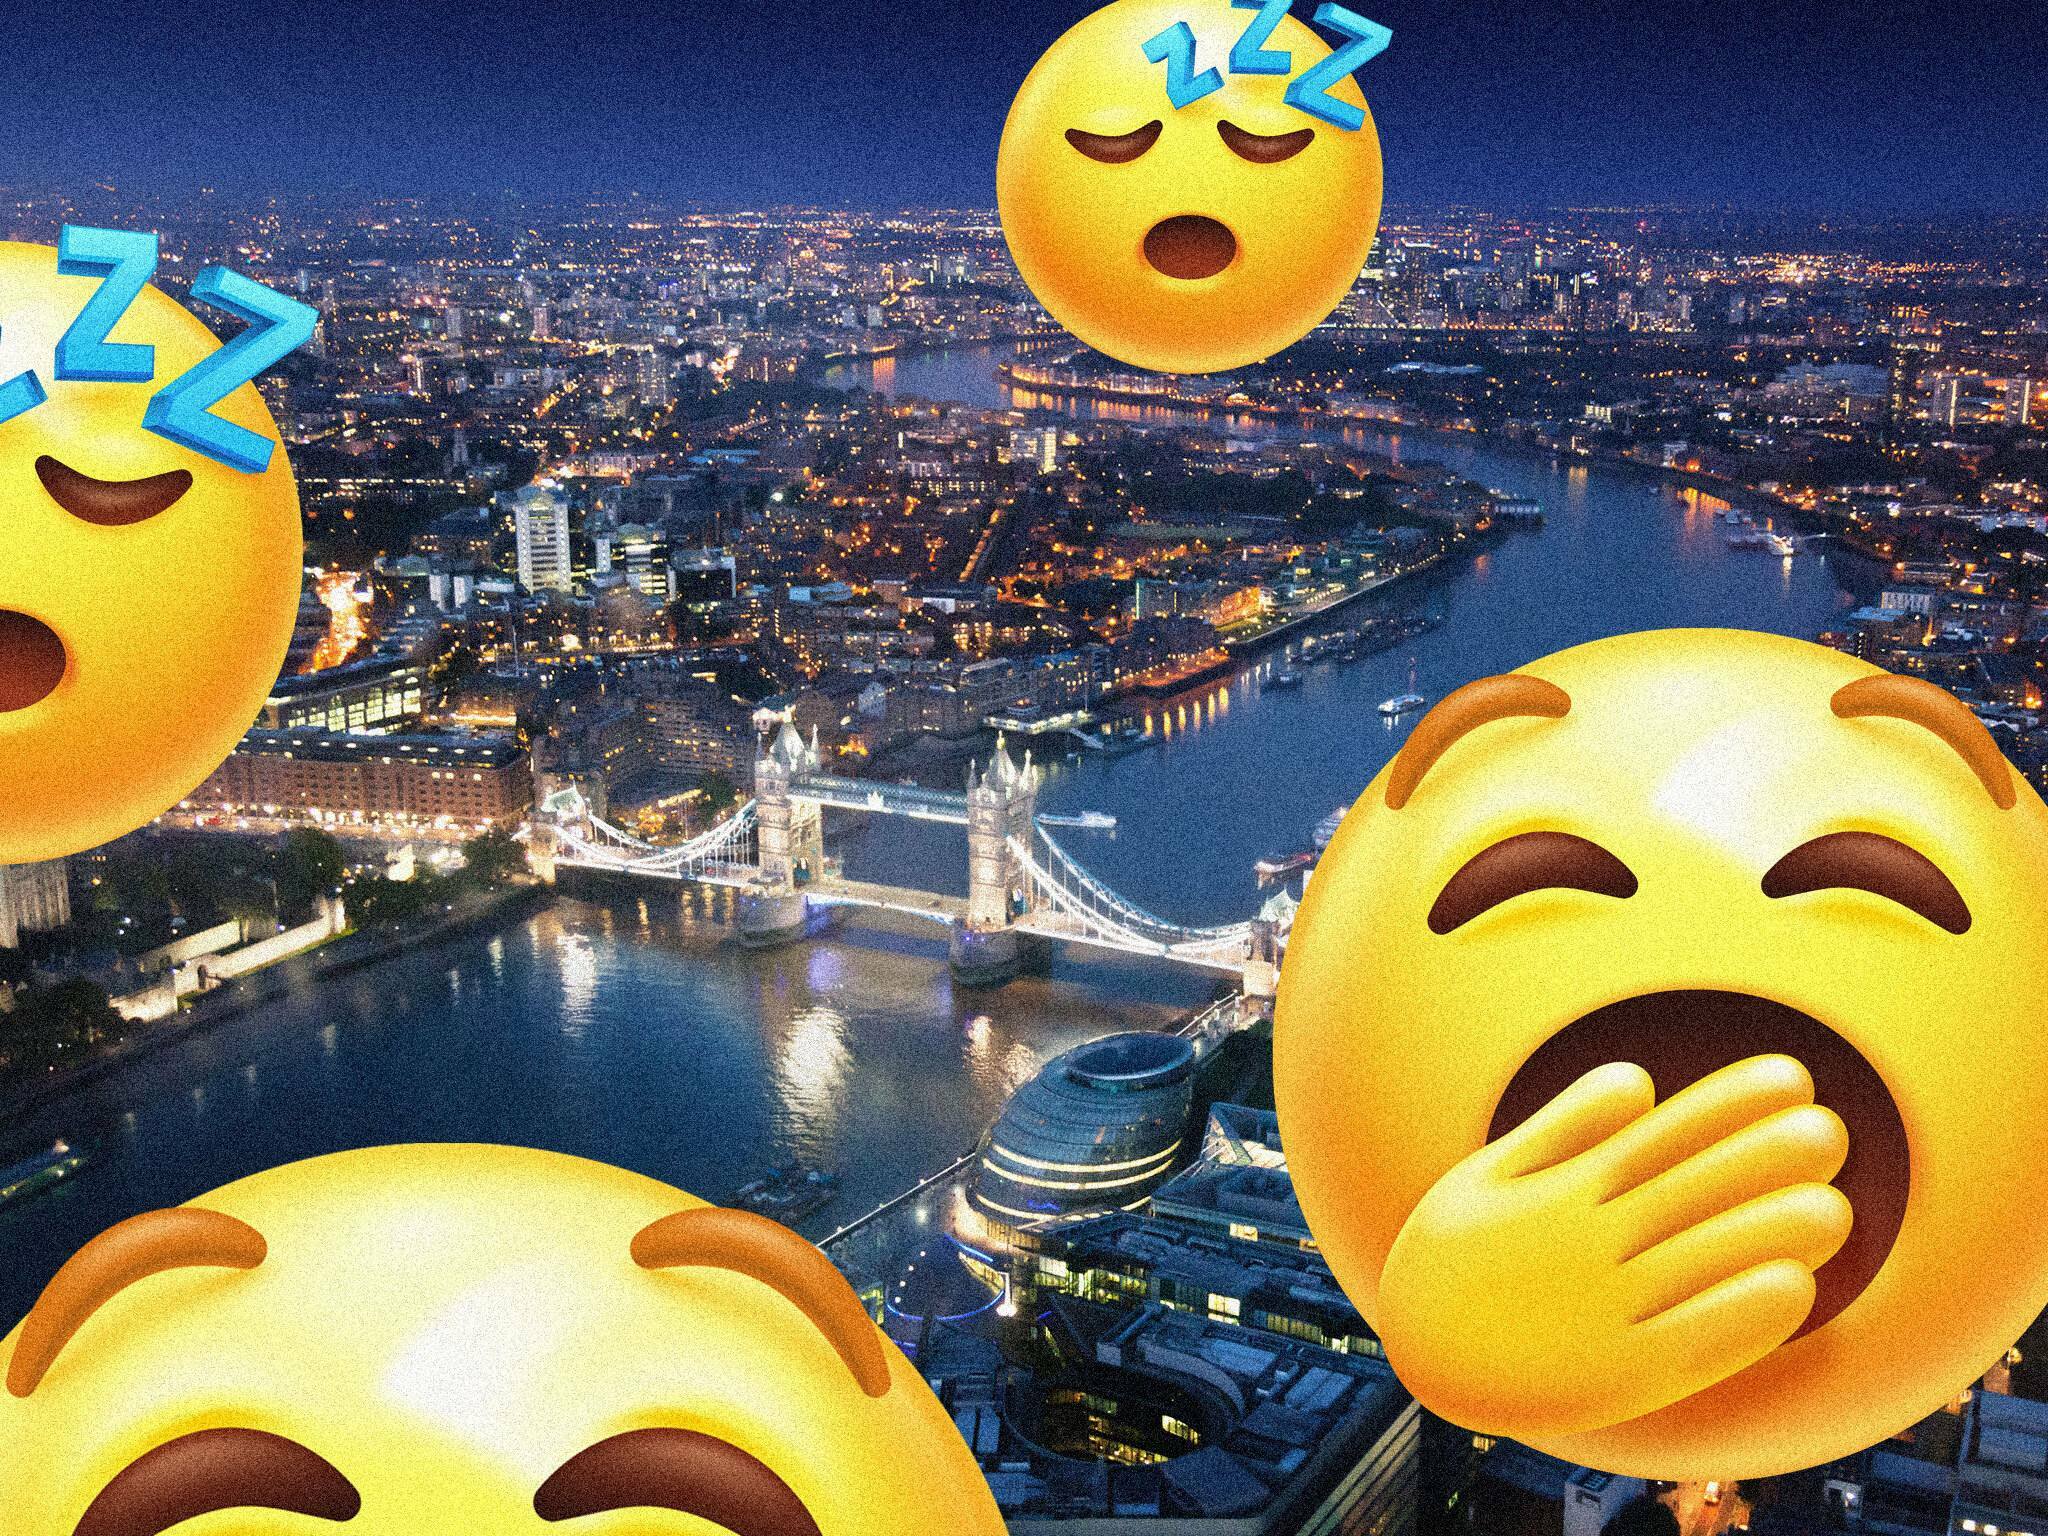 can-you-guess-the-most-sleepless-city-in-the-uk?